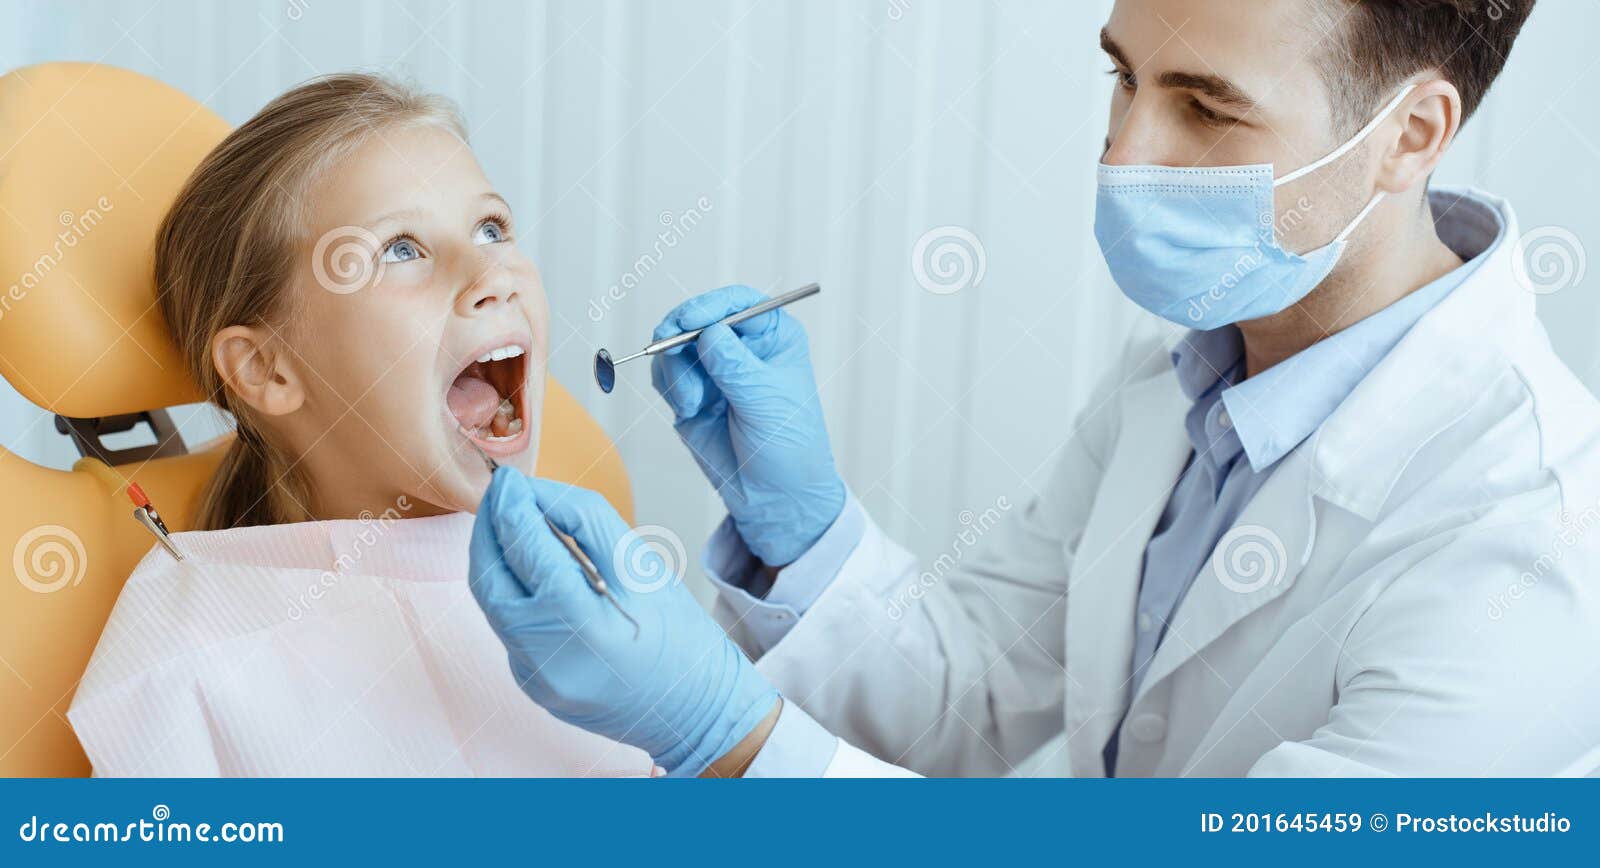 pediatric dentistry and examination of teeth of small patient